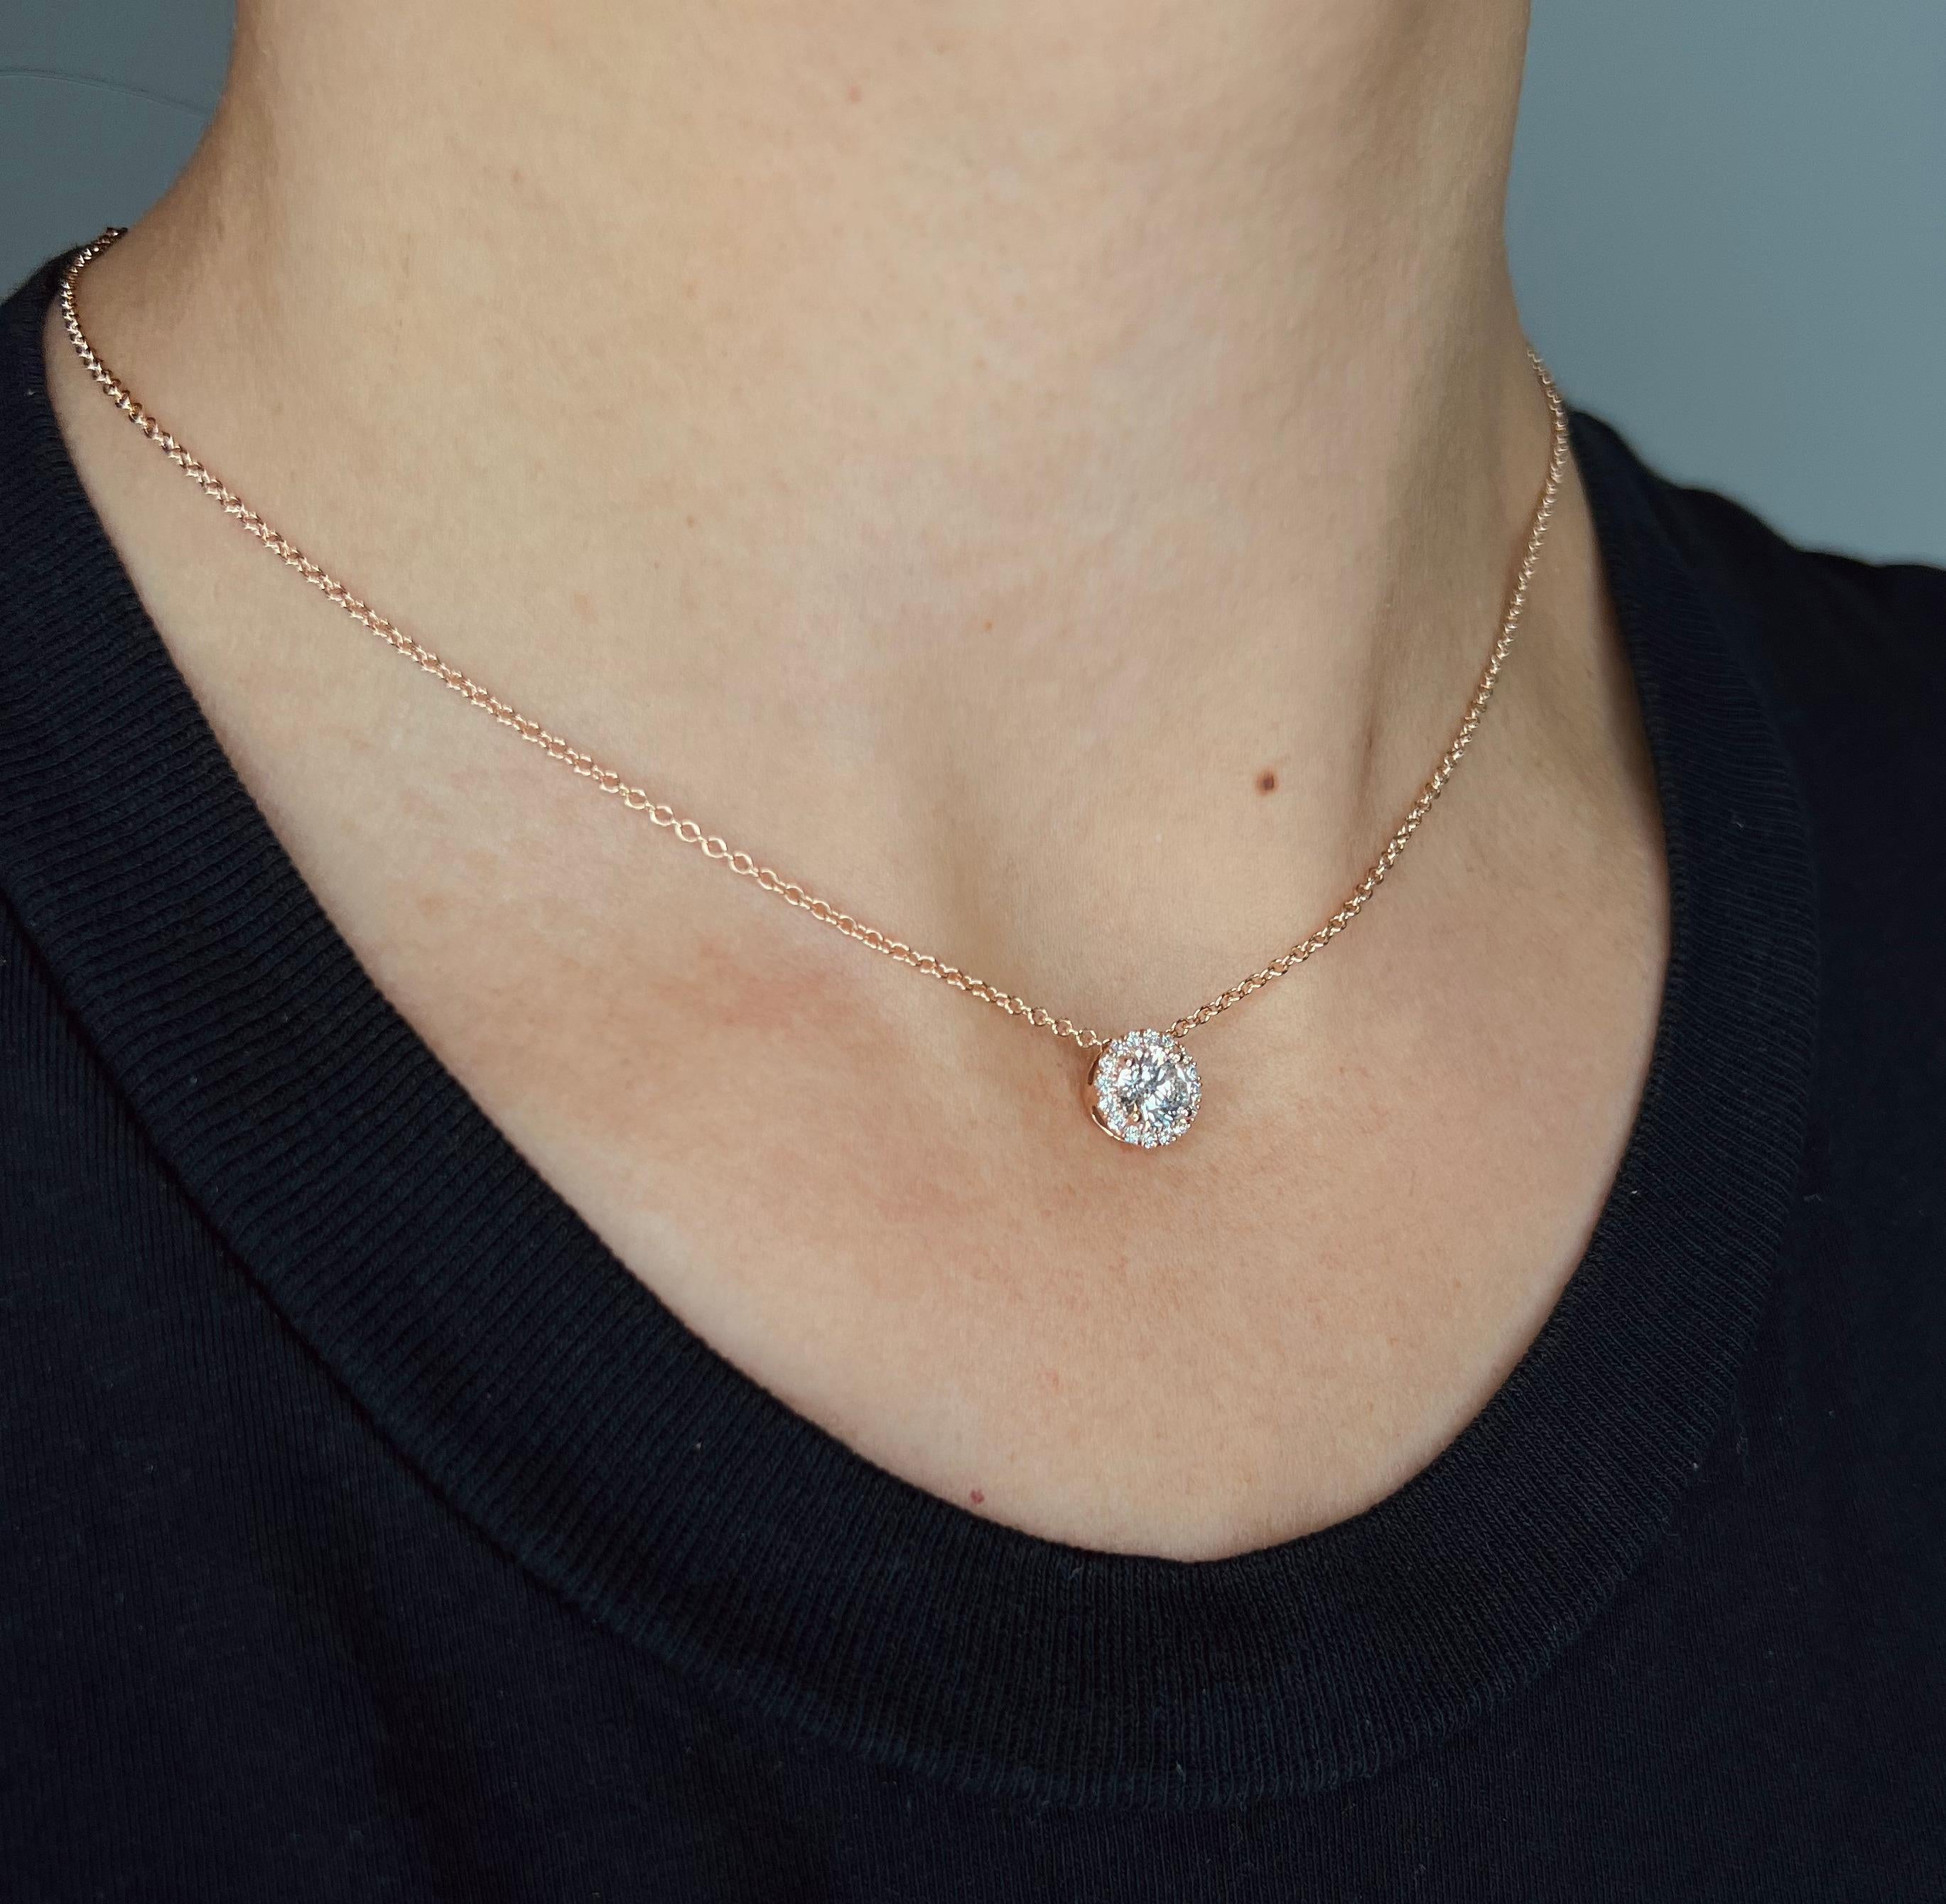 20 Inch 14k White Gold 0.90 Carat Round Cut Diamond Solitaire Pendant Necklace In New Condition For Sale In Los Angeles, CA